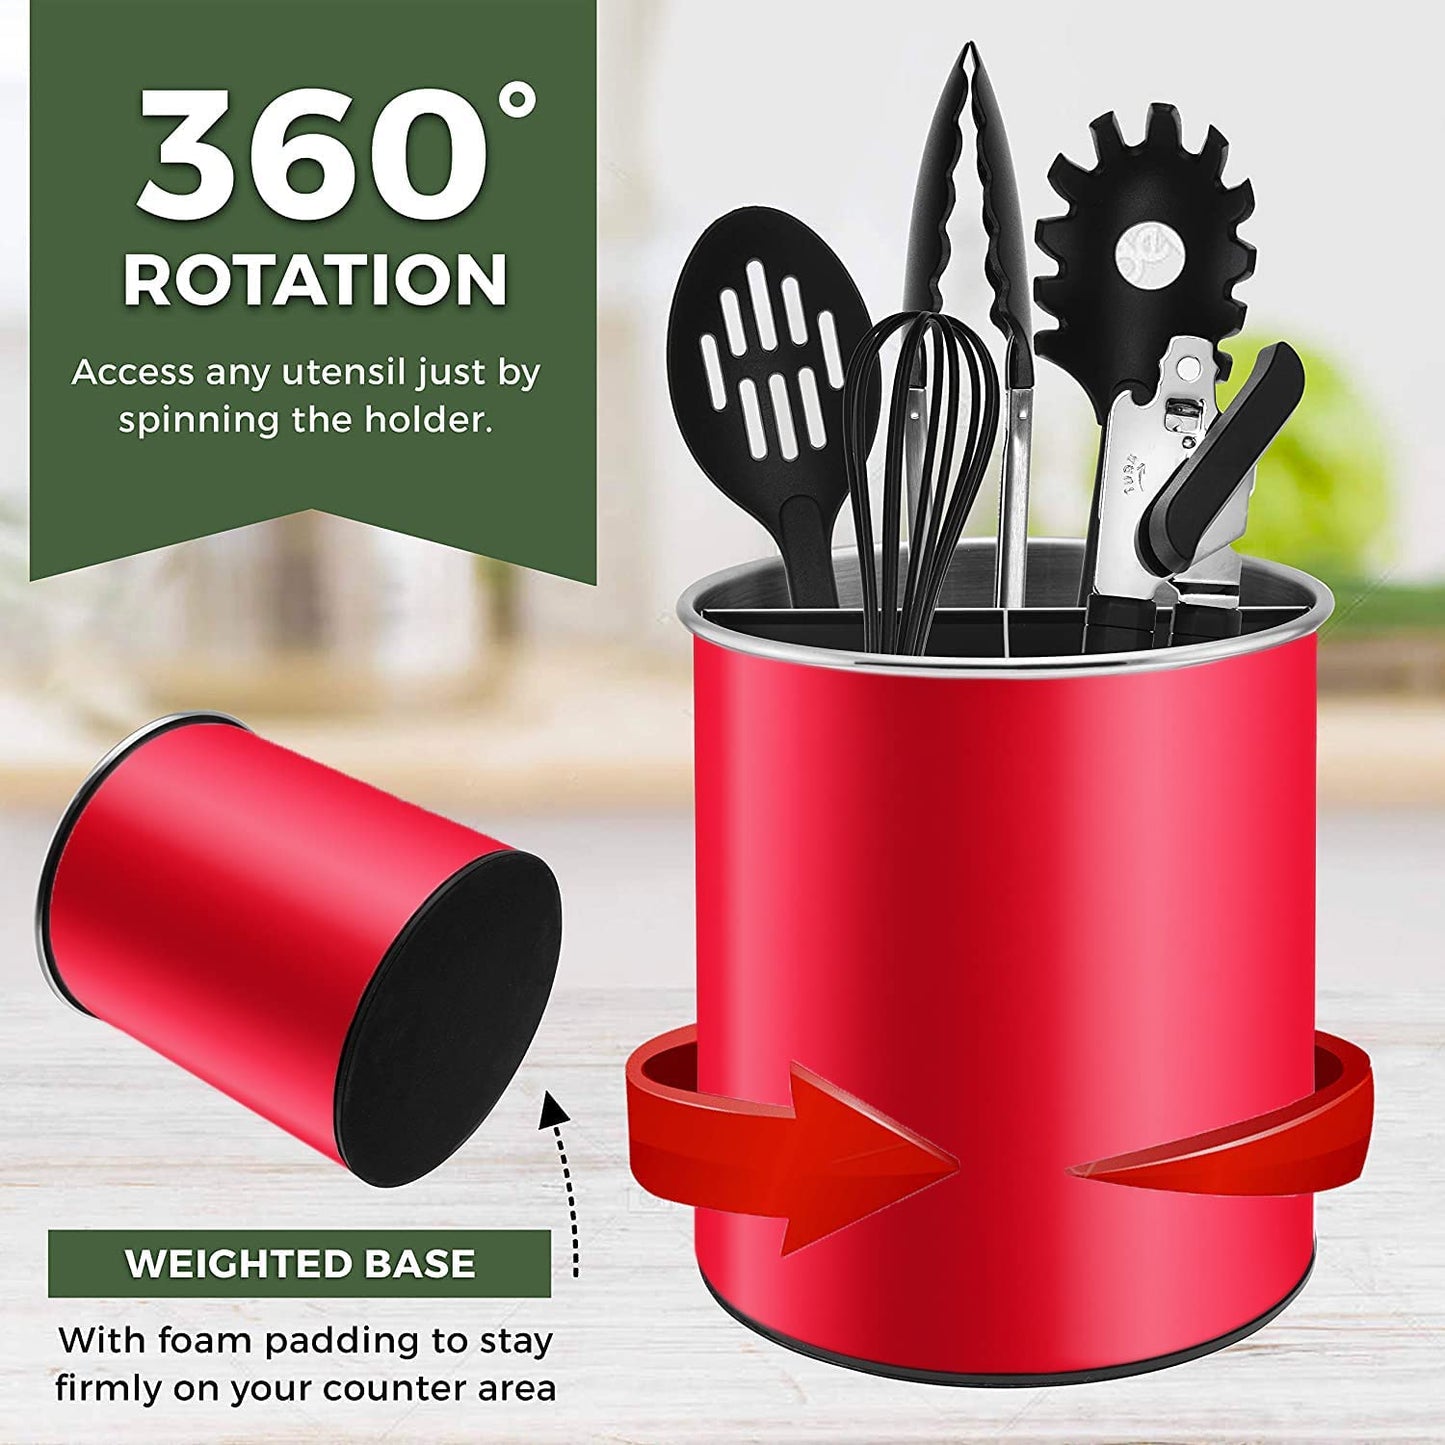 Bartnelli Extra Large Stainless Steel Kitchen Utensil Holder - 360° Rotating Utensil Caddy - Weighted Base for Stability - Countertop Organizer Crock With Removable Divider (RUBY RED)